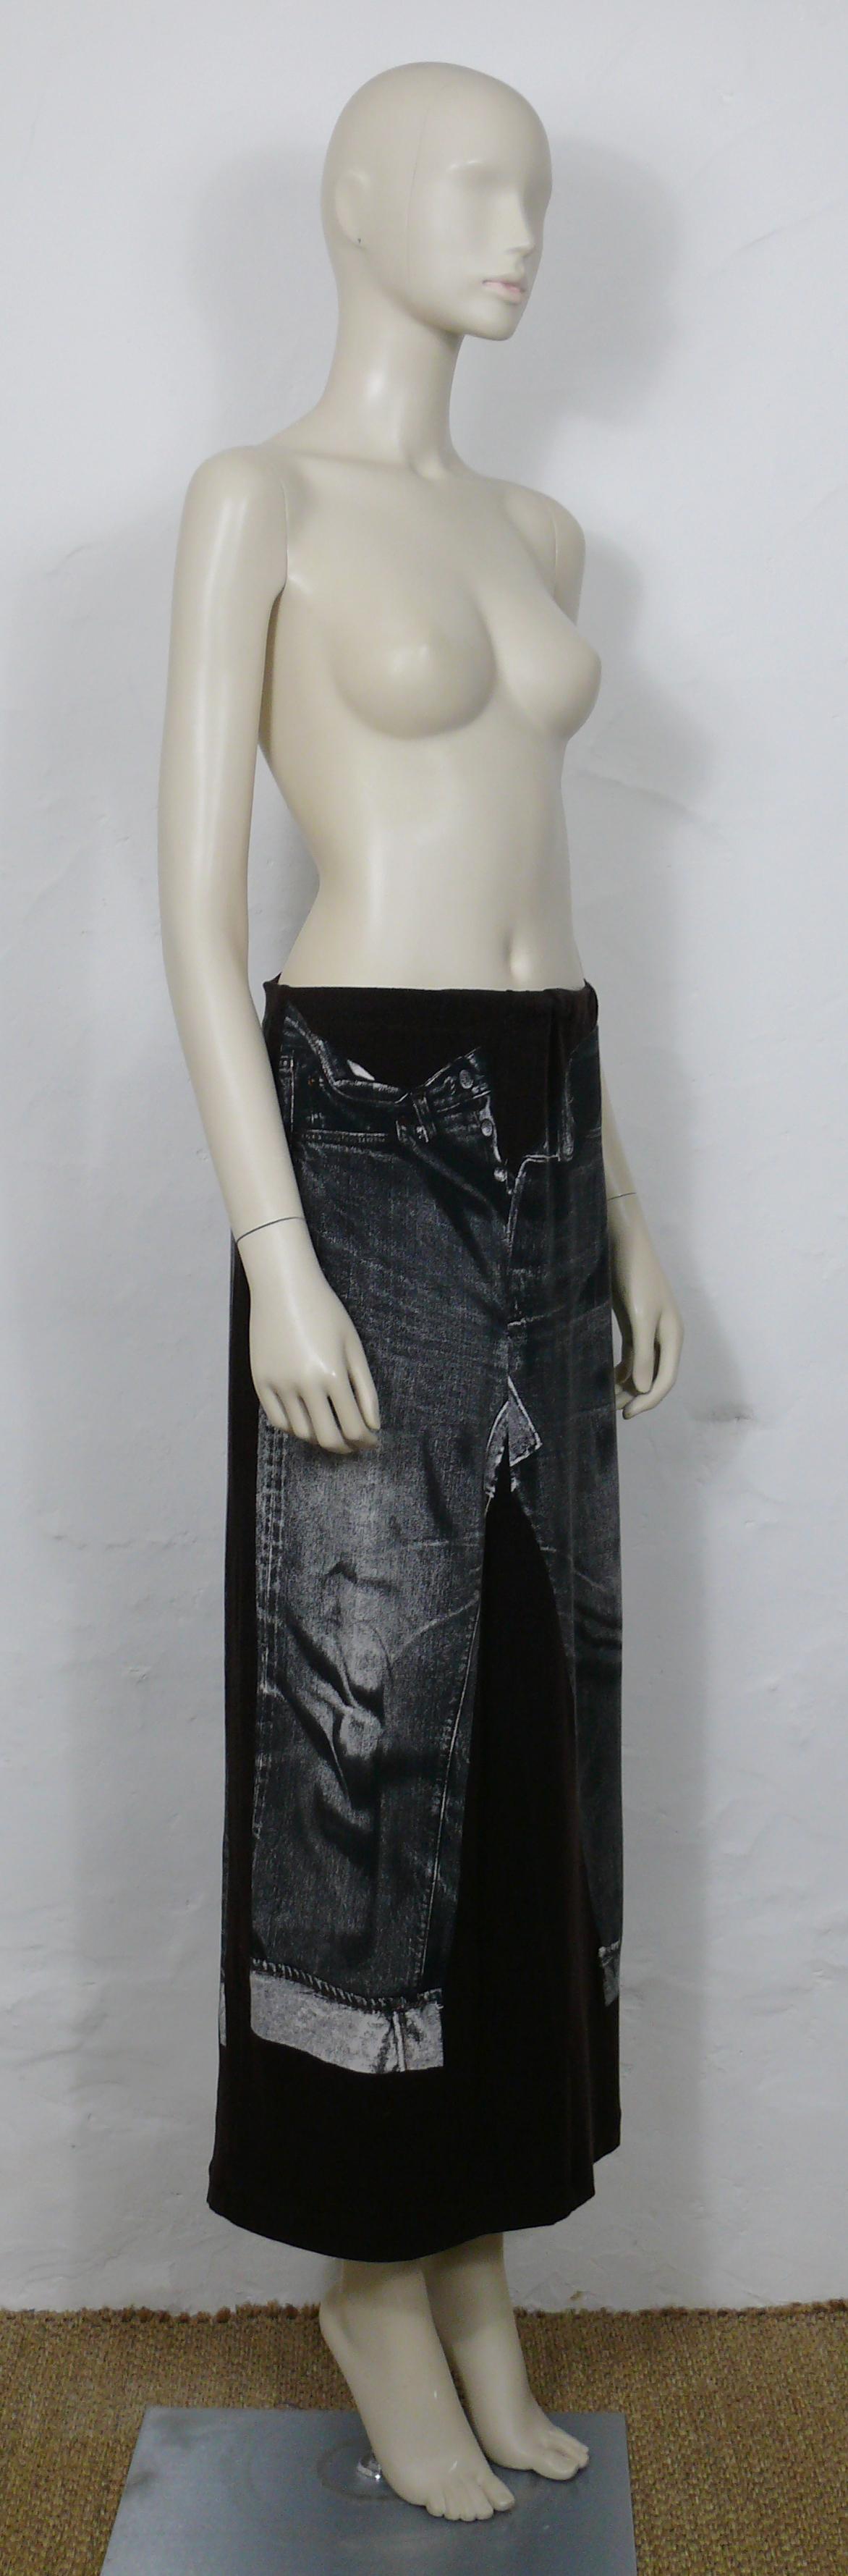 JEAN PAUL GAULTIER plum jersey skirt featuring an X-RAY screen trompe l’œil jeans on front and back.

This skirt features :
- Plum jersey background featuring distressed black/white x-ray screen trompe l’œil jeans.
- Maxi length.
- Stretchy